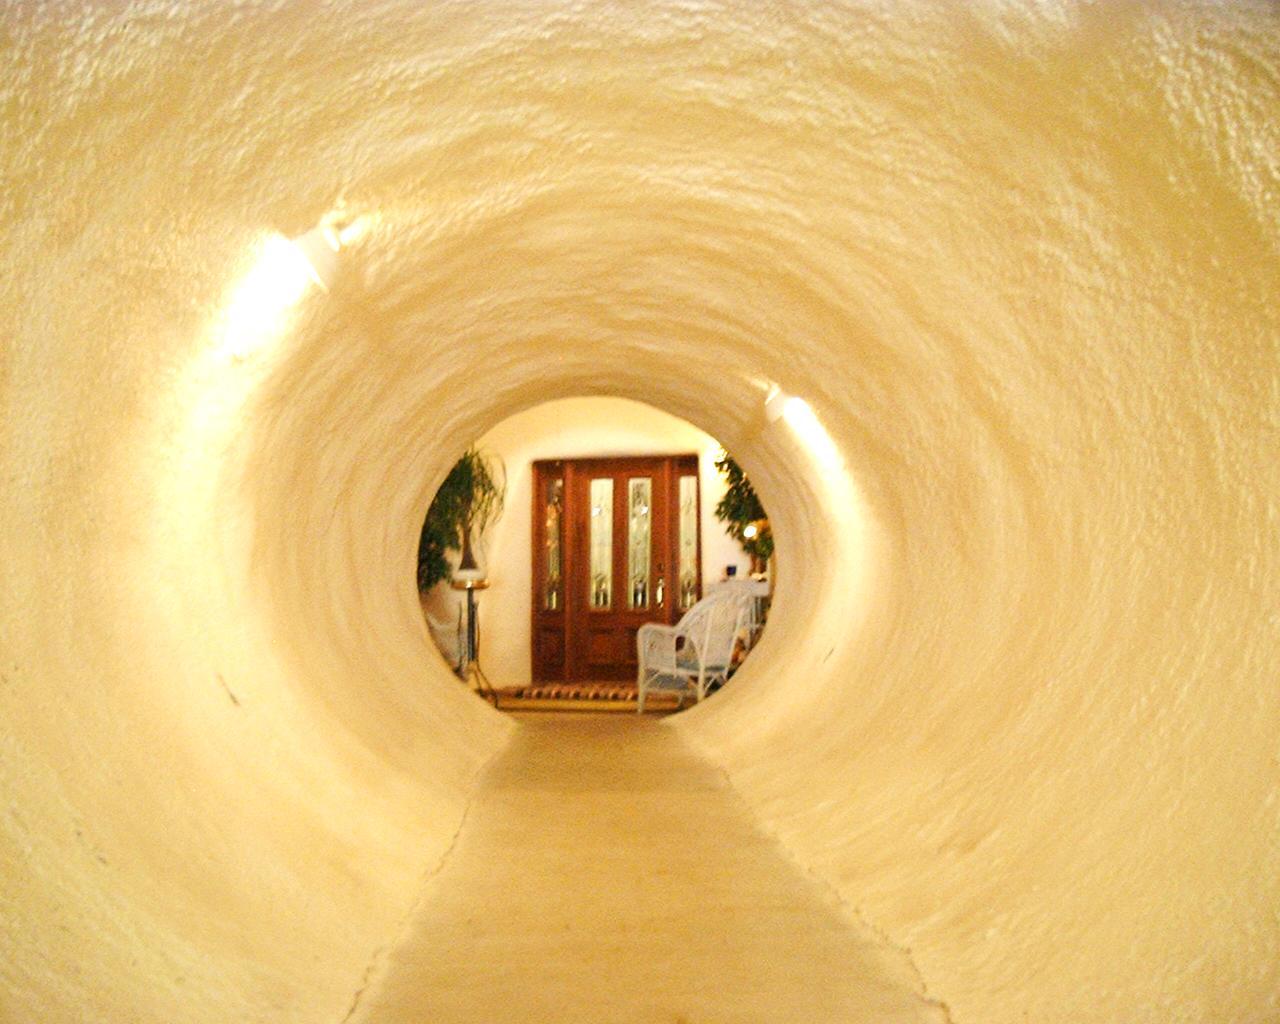 The invisible underground home entrance tunnel.